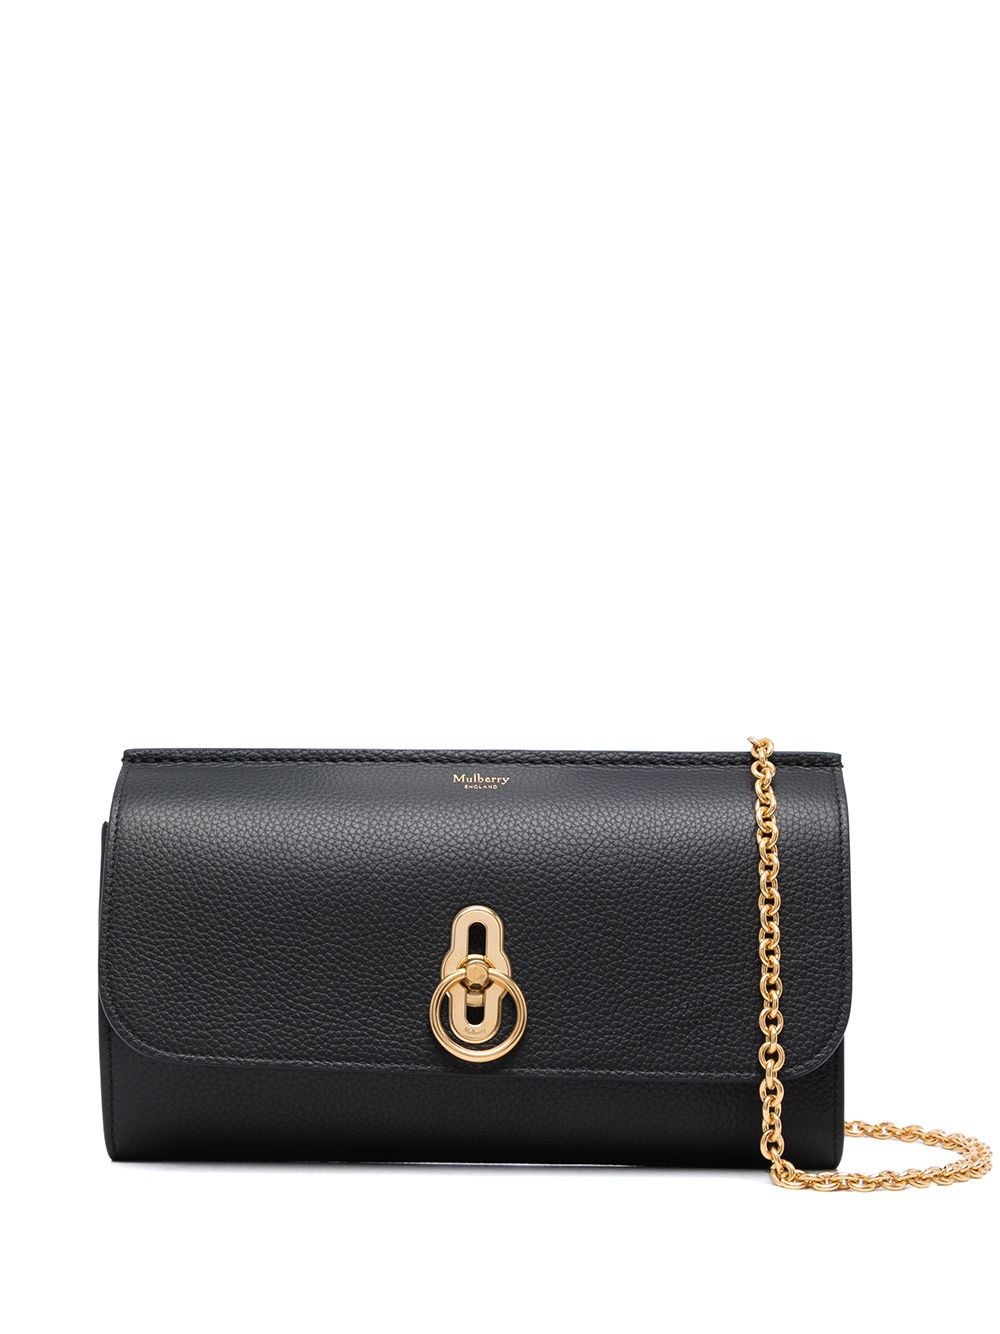 Mulberry Small Amberley Grained Bag - Farfetch